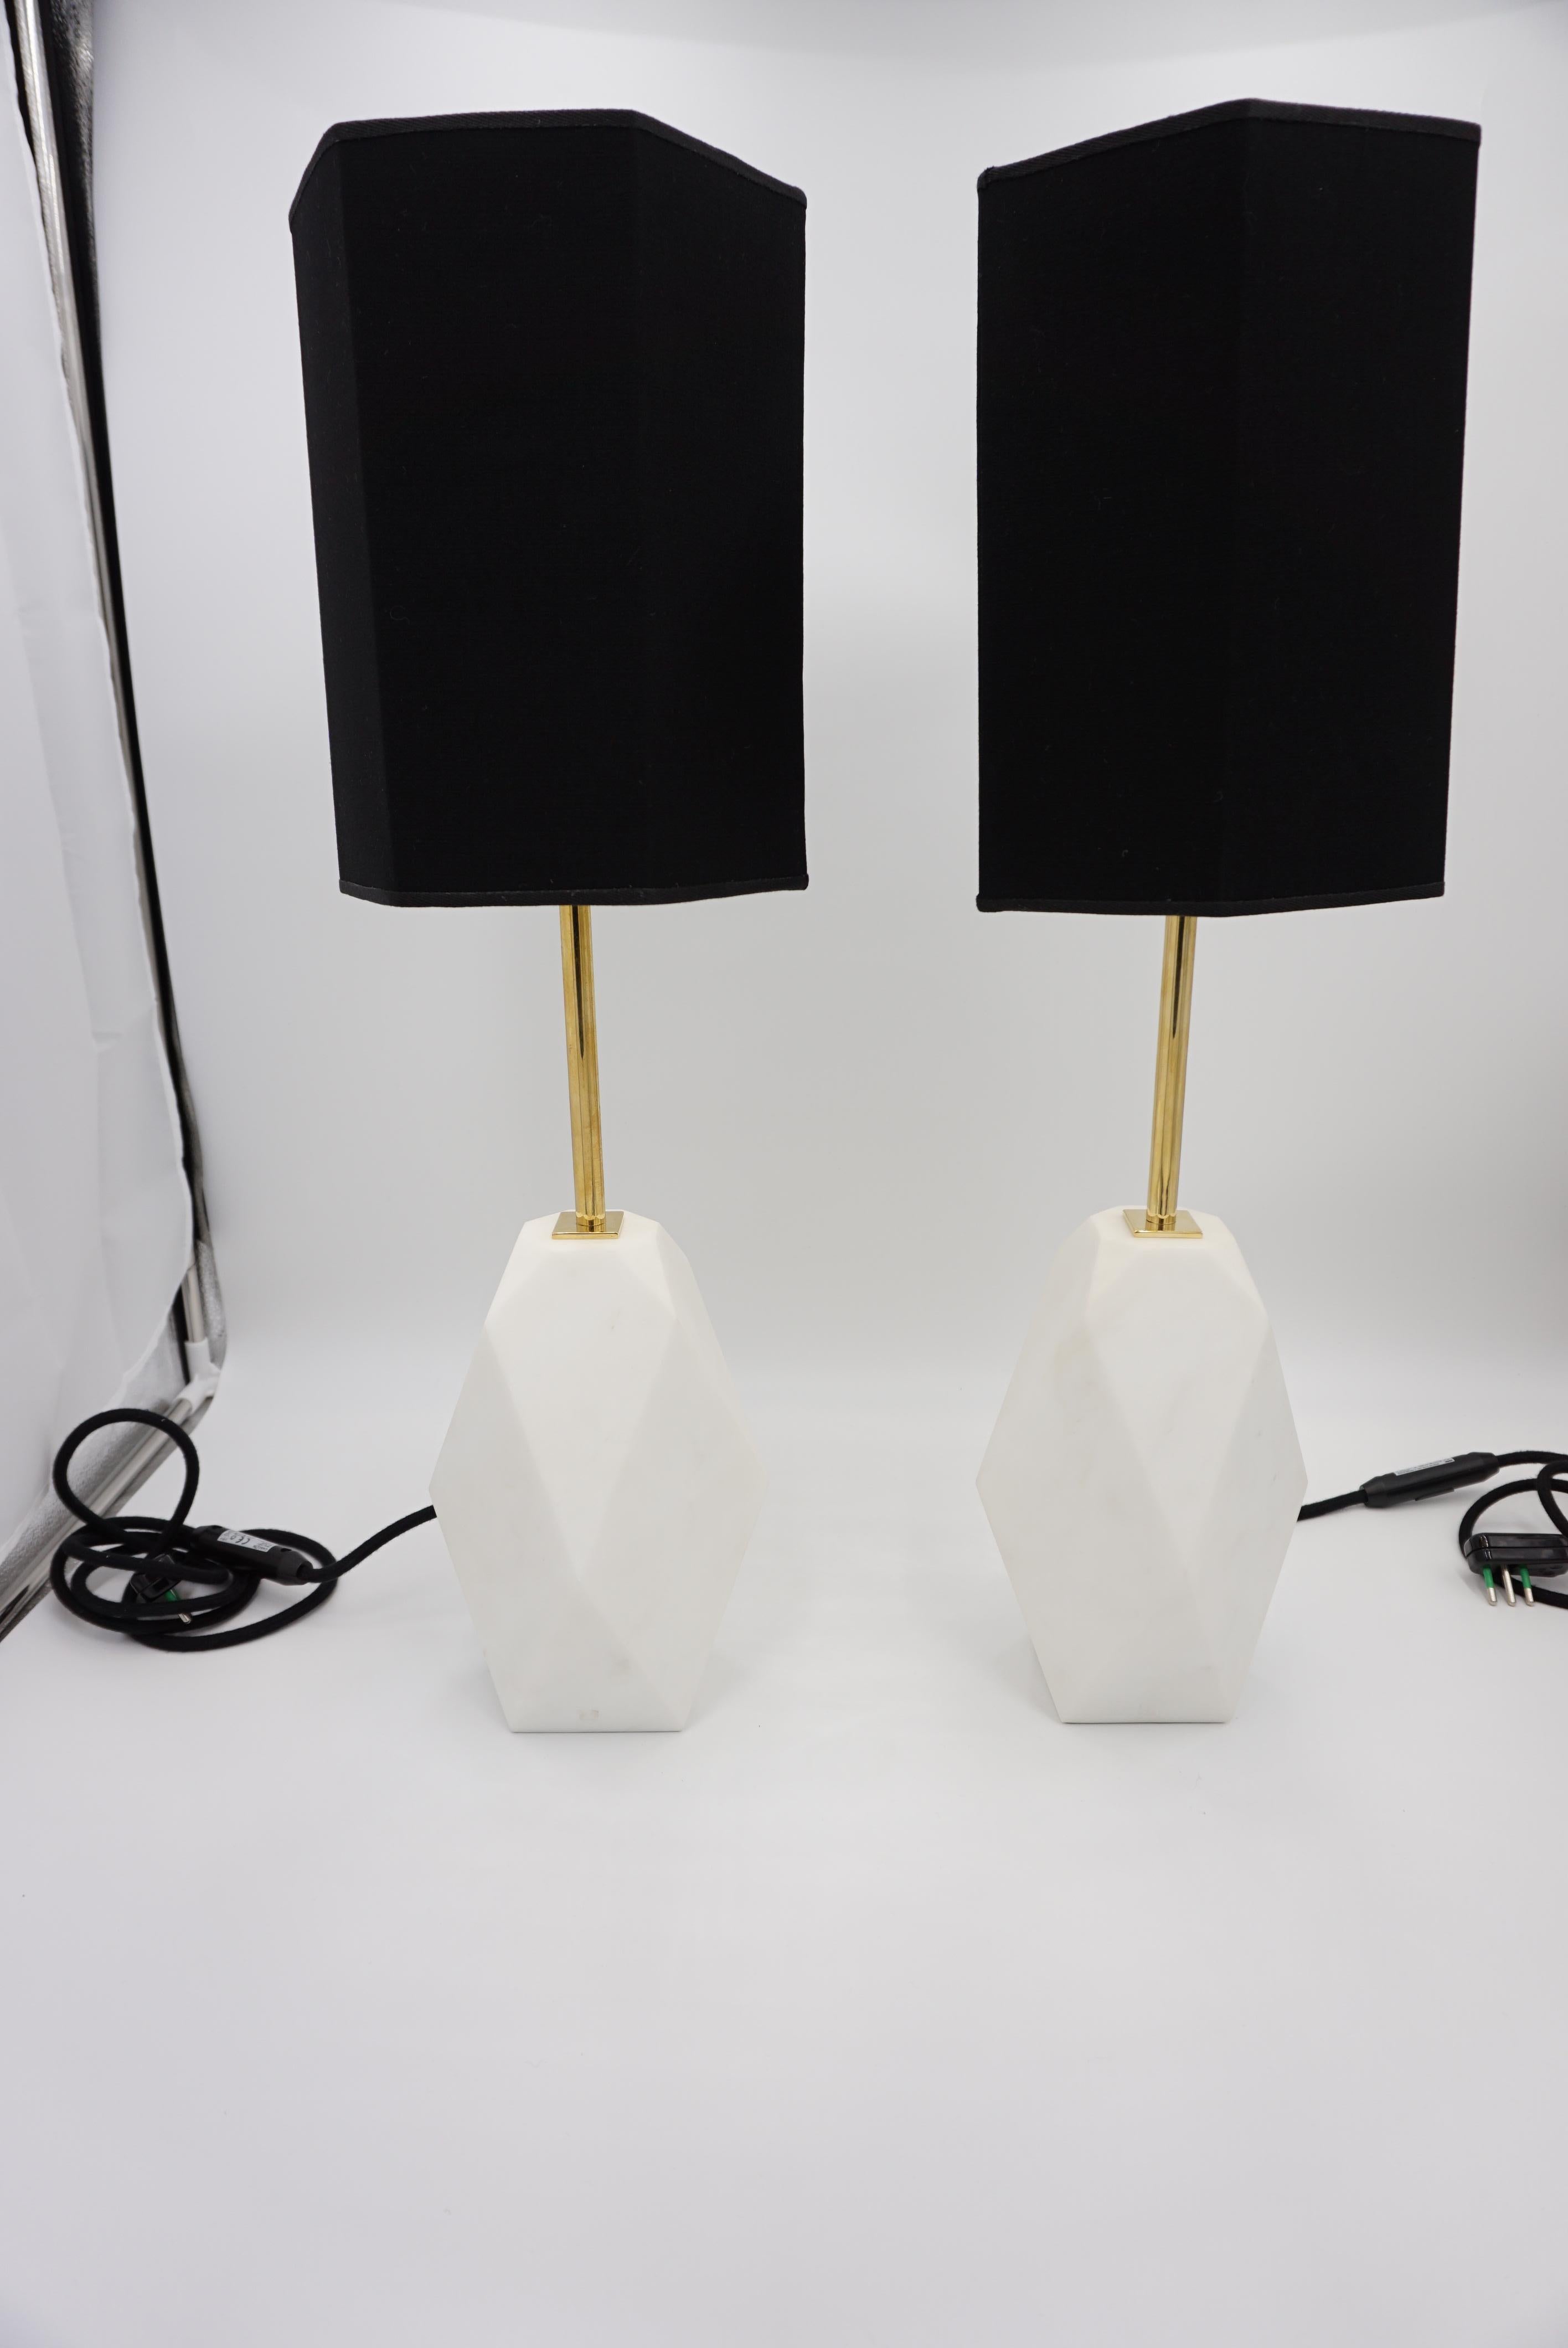 Pair of table lamps PRISMA by Lorenzo Ciompi
Extremely white Carrara marble carved in a prism shape
Brass structure , black cotton lampshade ( gold inner) at parallelpiped shape
all handmade
Measures: 20 x 20cm H 62.5 cm ; the base marble: 16 x